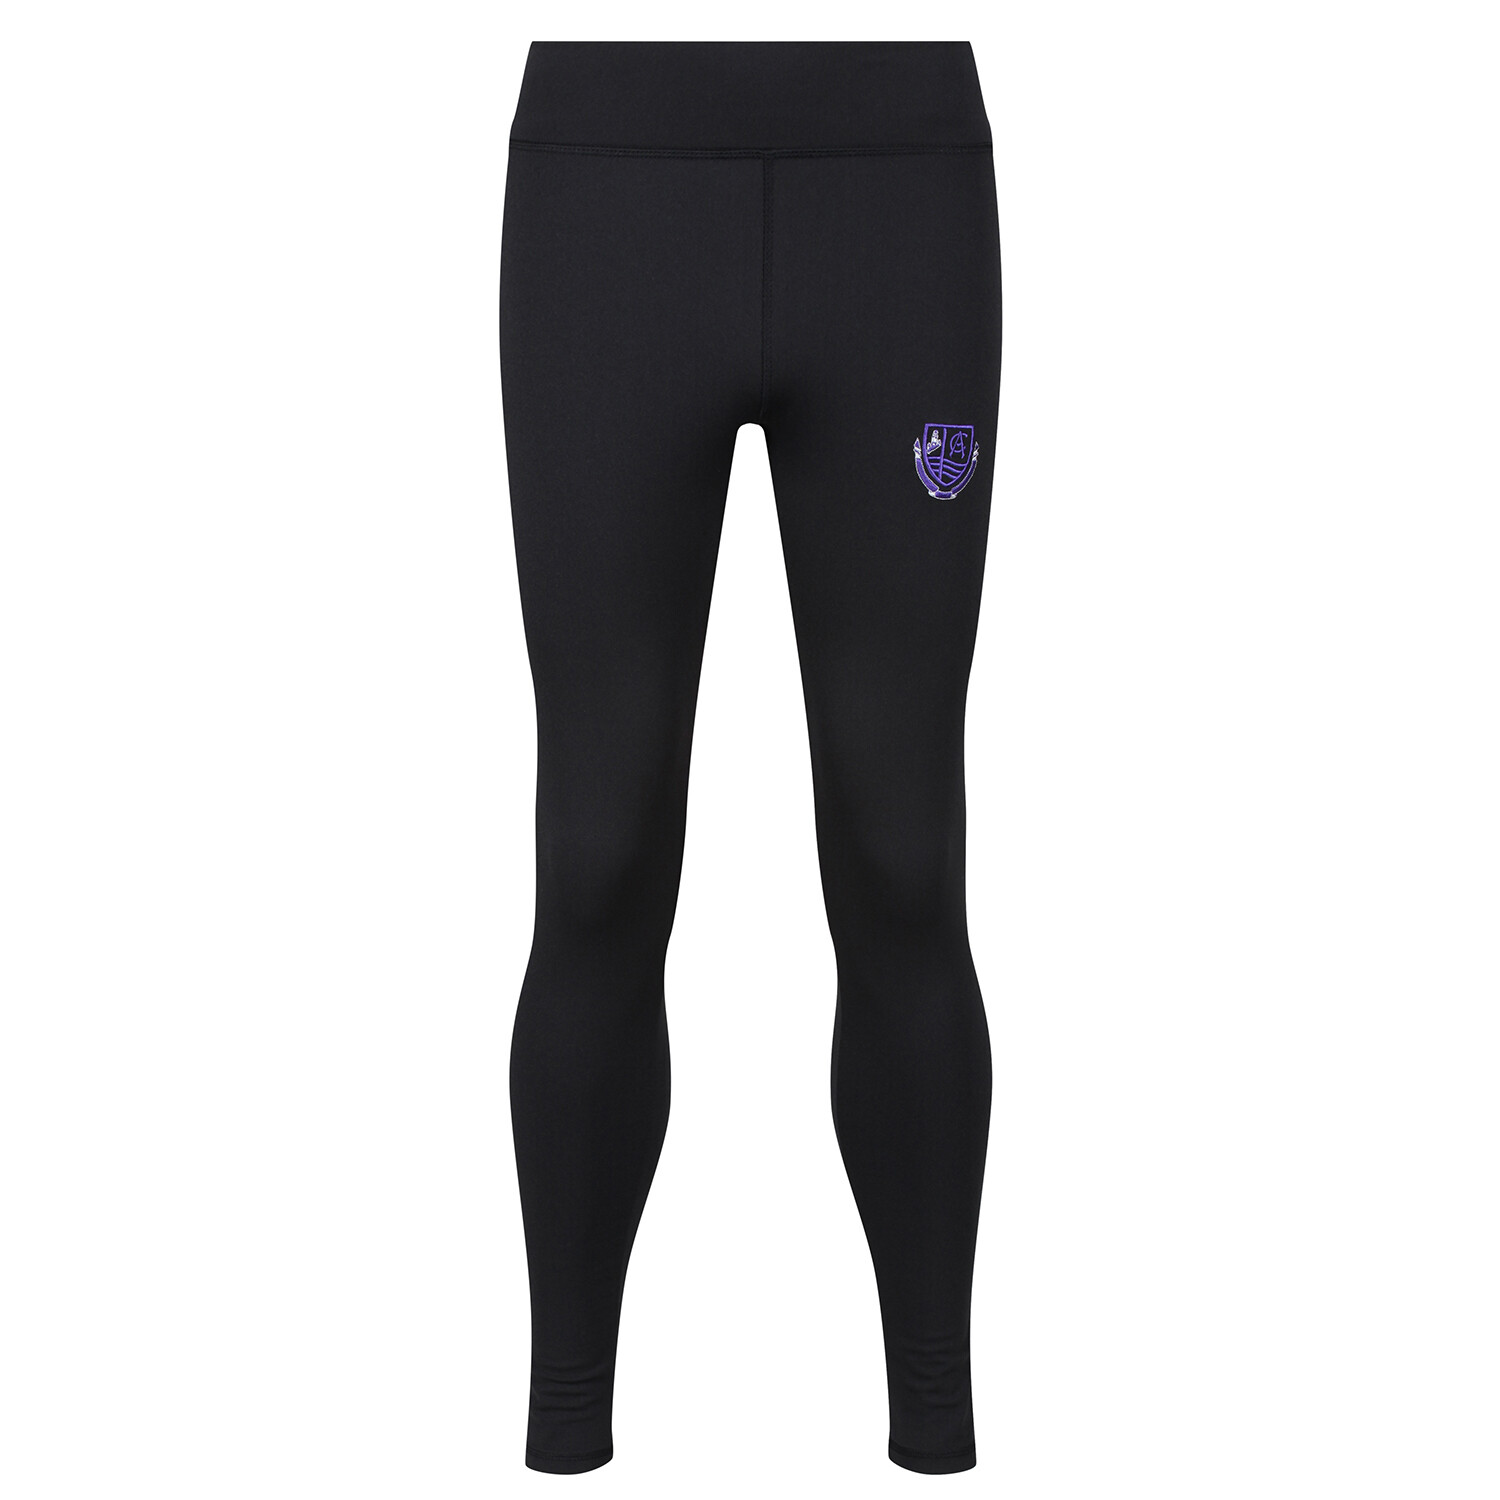 Clydeview Academy PE Leggings